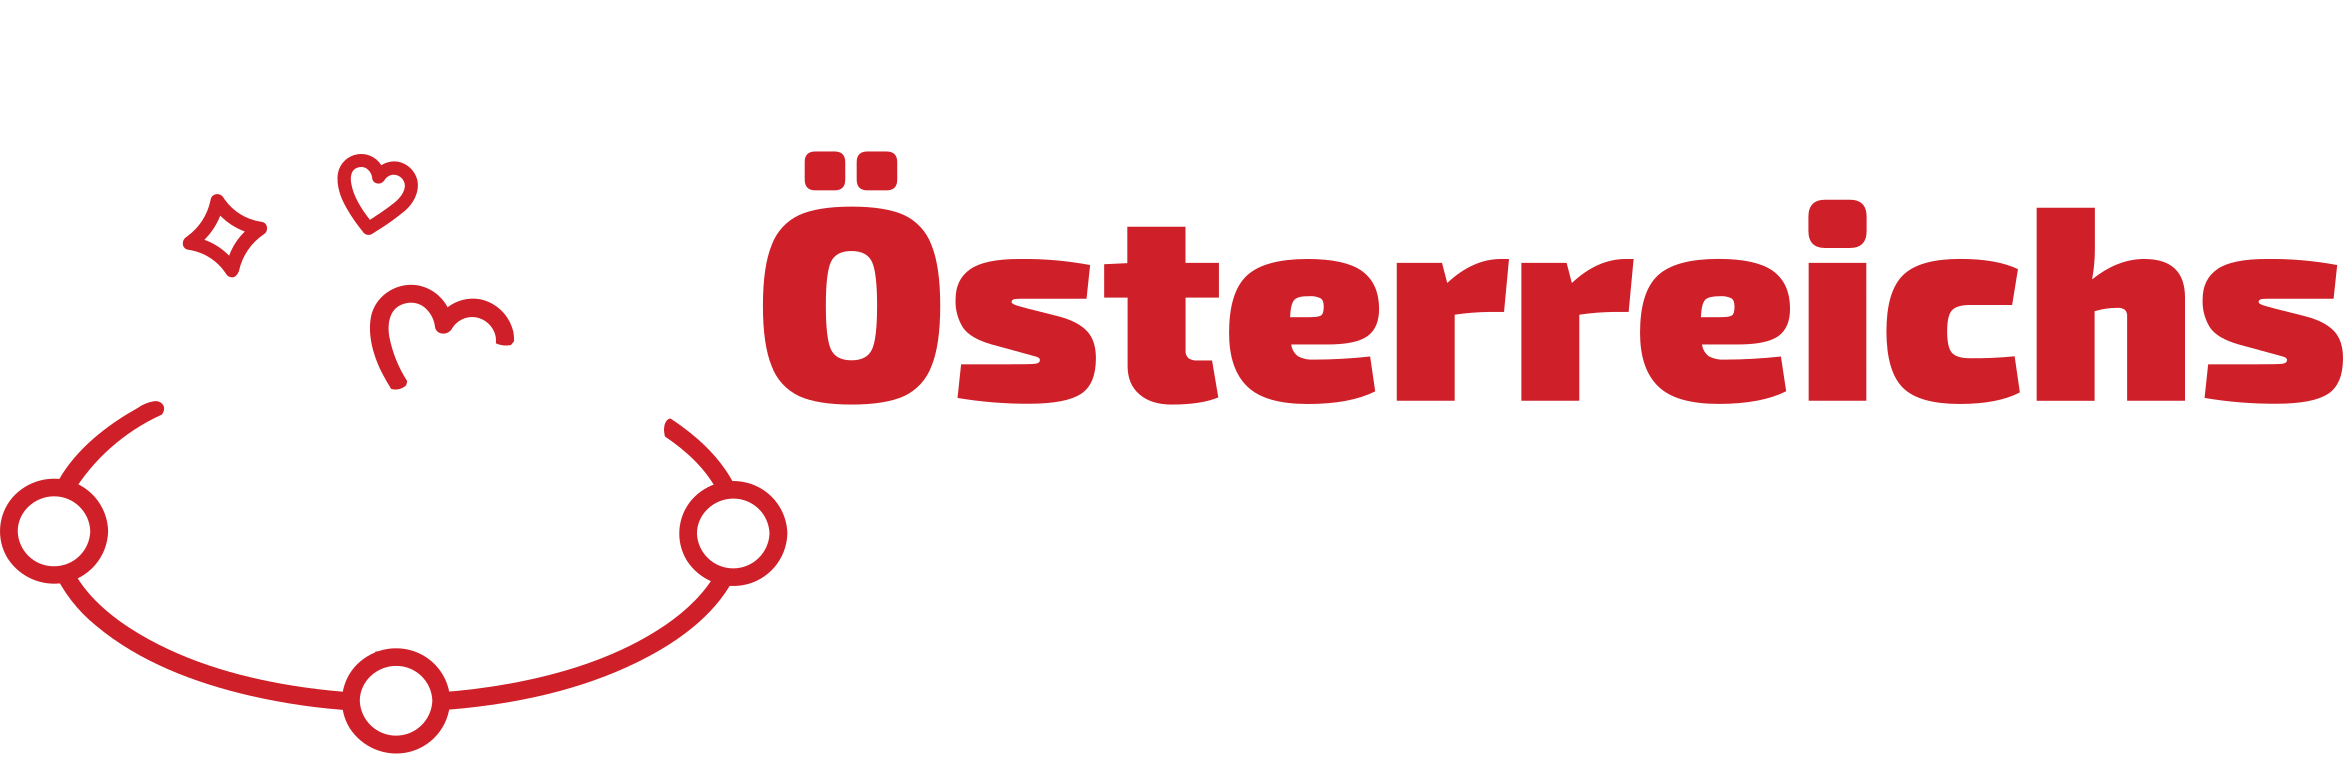 http://oesterreichonlinecasino.at/payment-methods/neosurf/